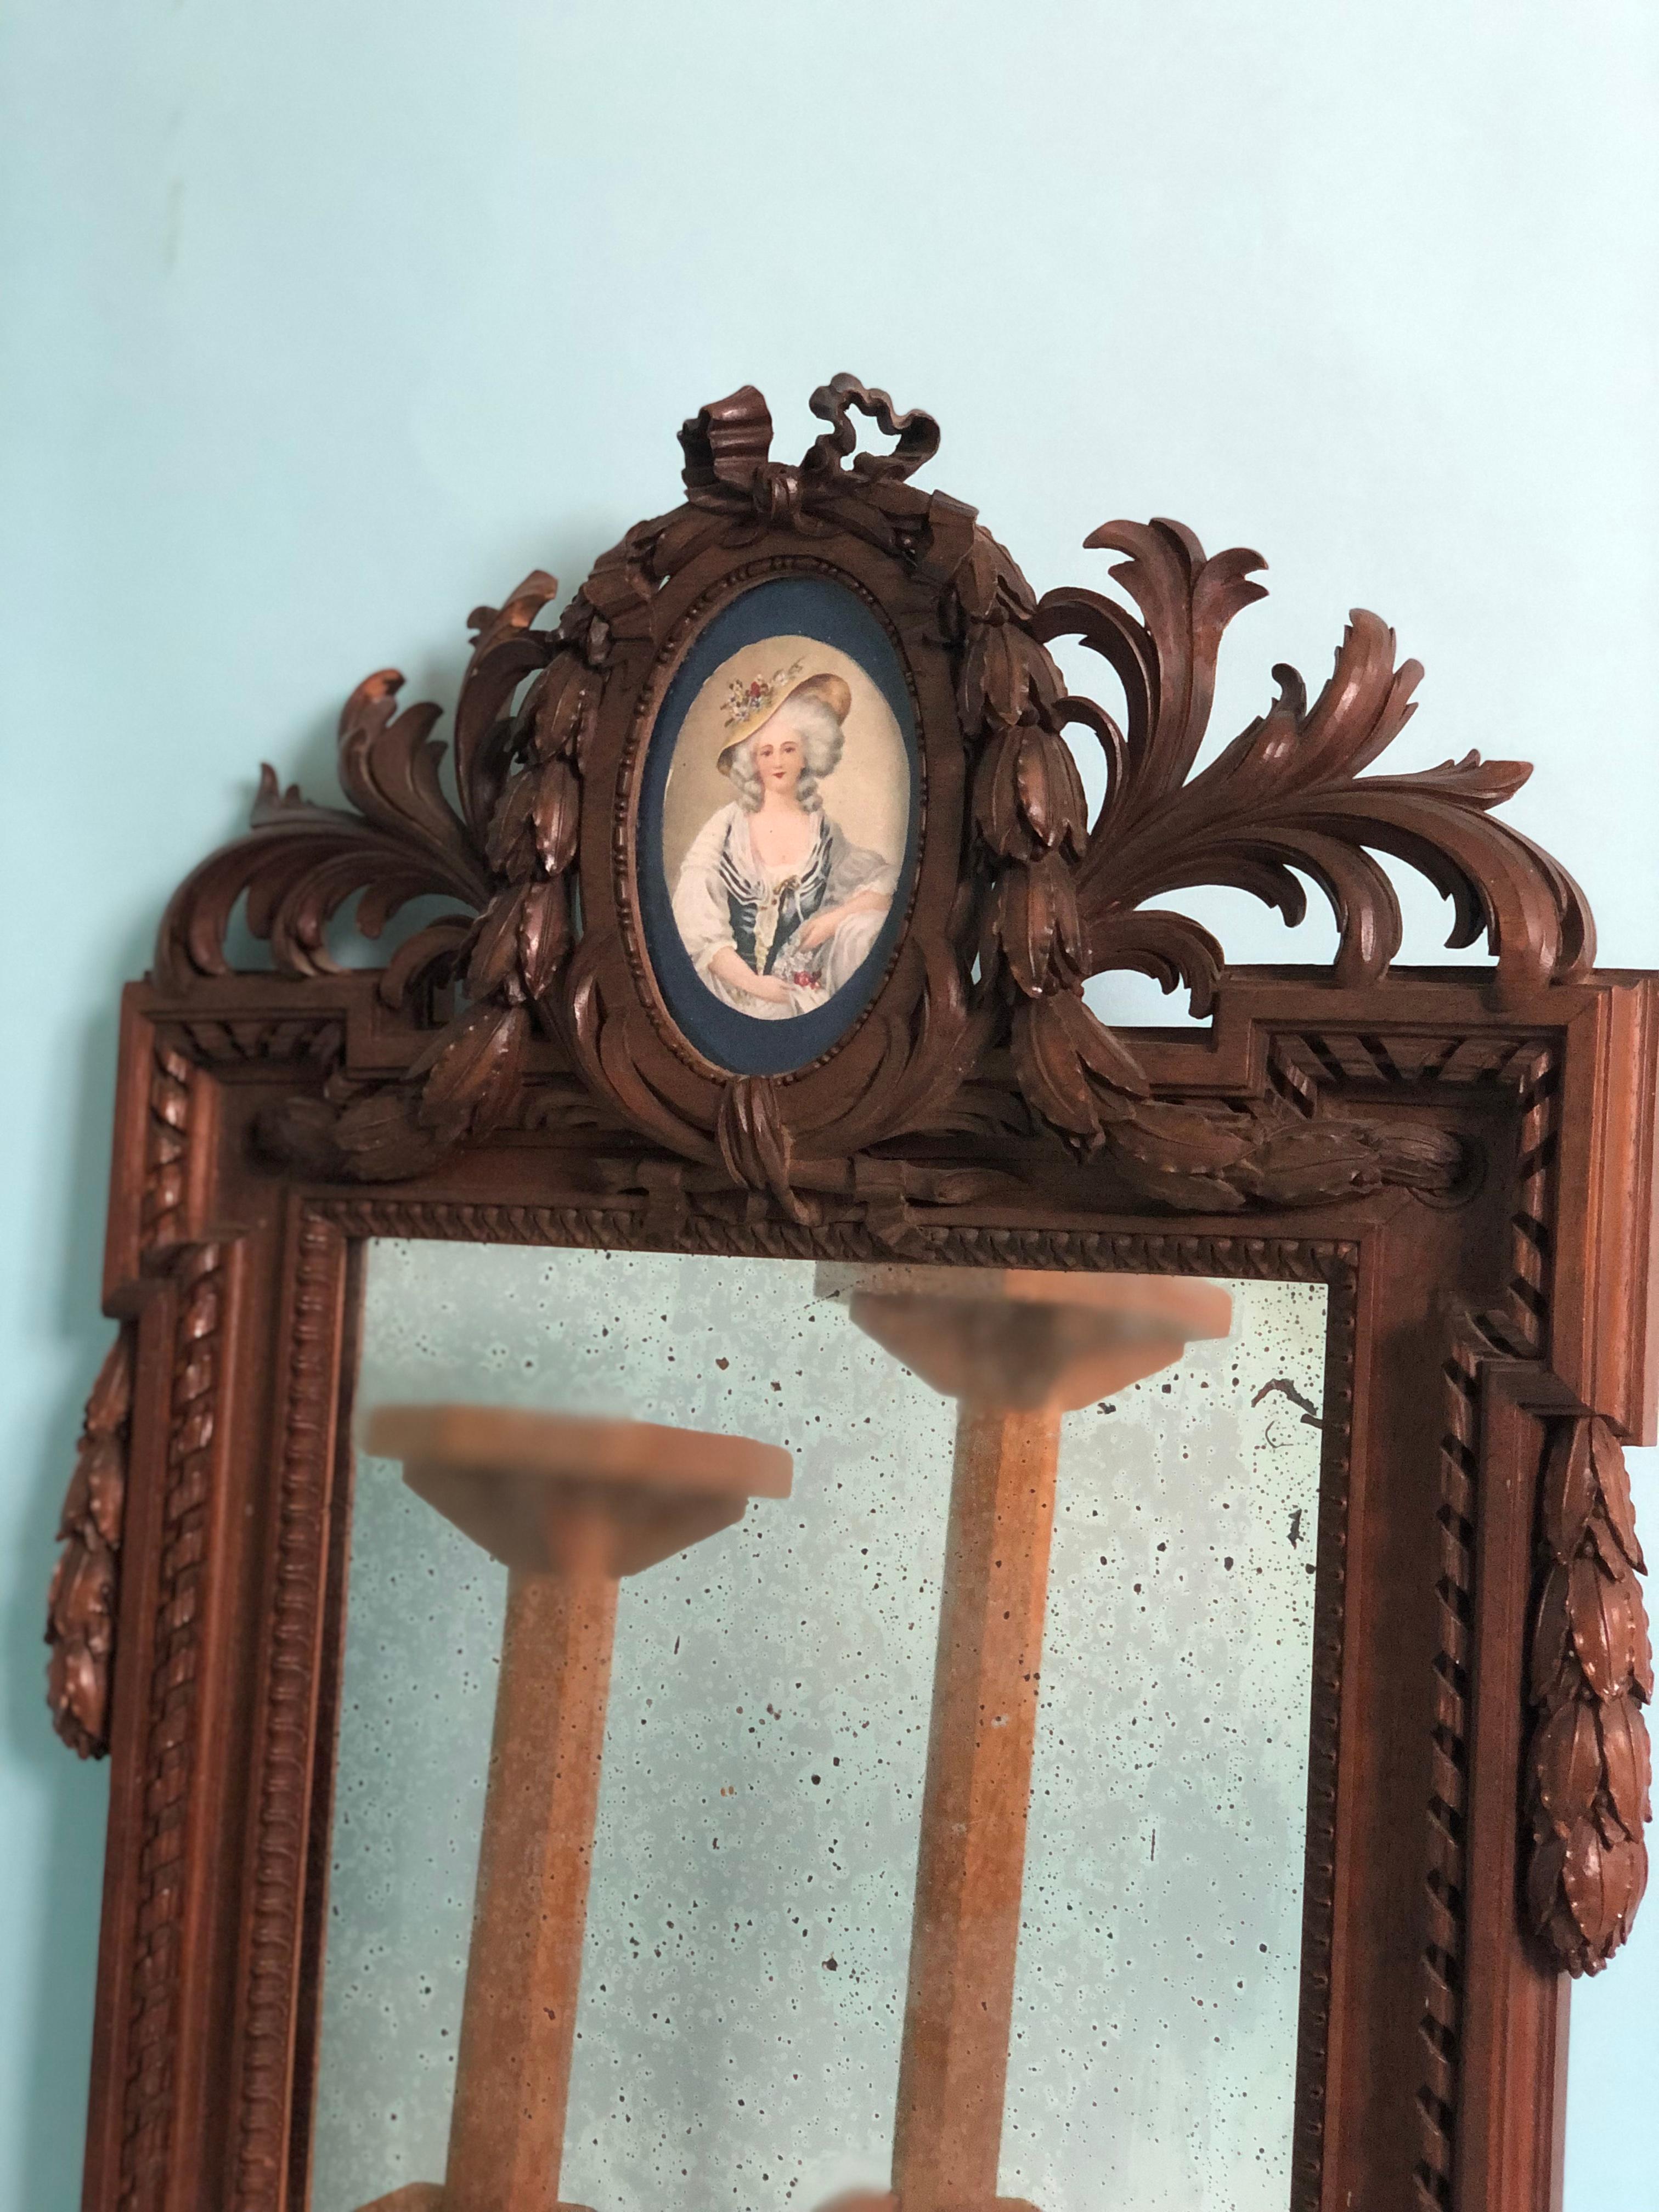 Very richly carved mahogany mirror with a small portrait at the top, Napoleon III  France. The mirror glass is beautifully weathered. The portrait is from a later date.

In good condition, France, Late 19th Century

Object: Mirror
Designer: